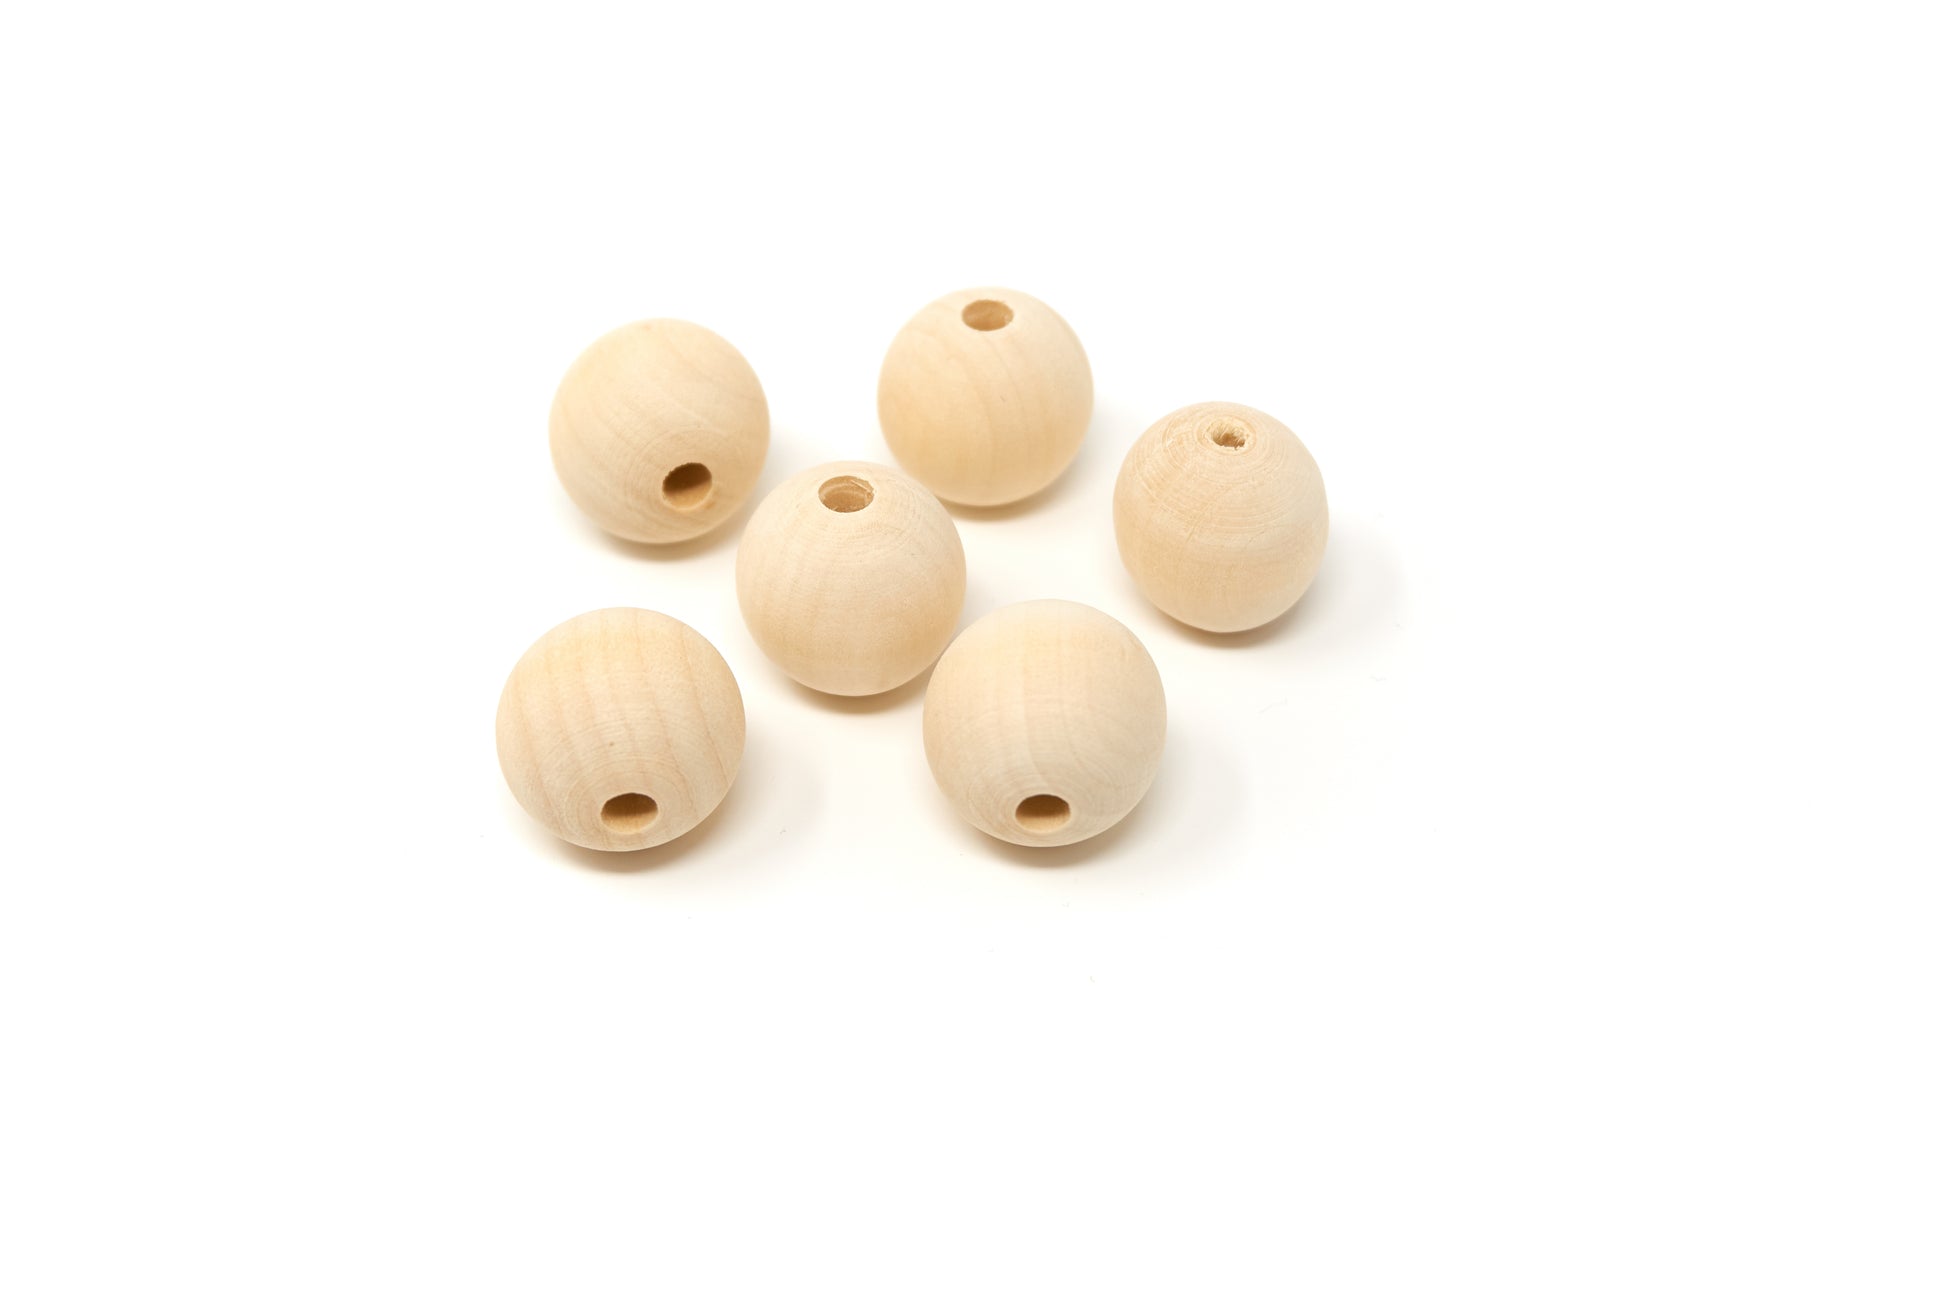 Natural Round Wood Beads 25mm 36 pieces - Cameos Art Shop